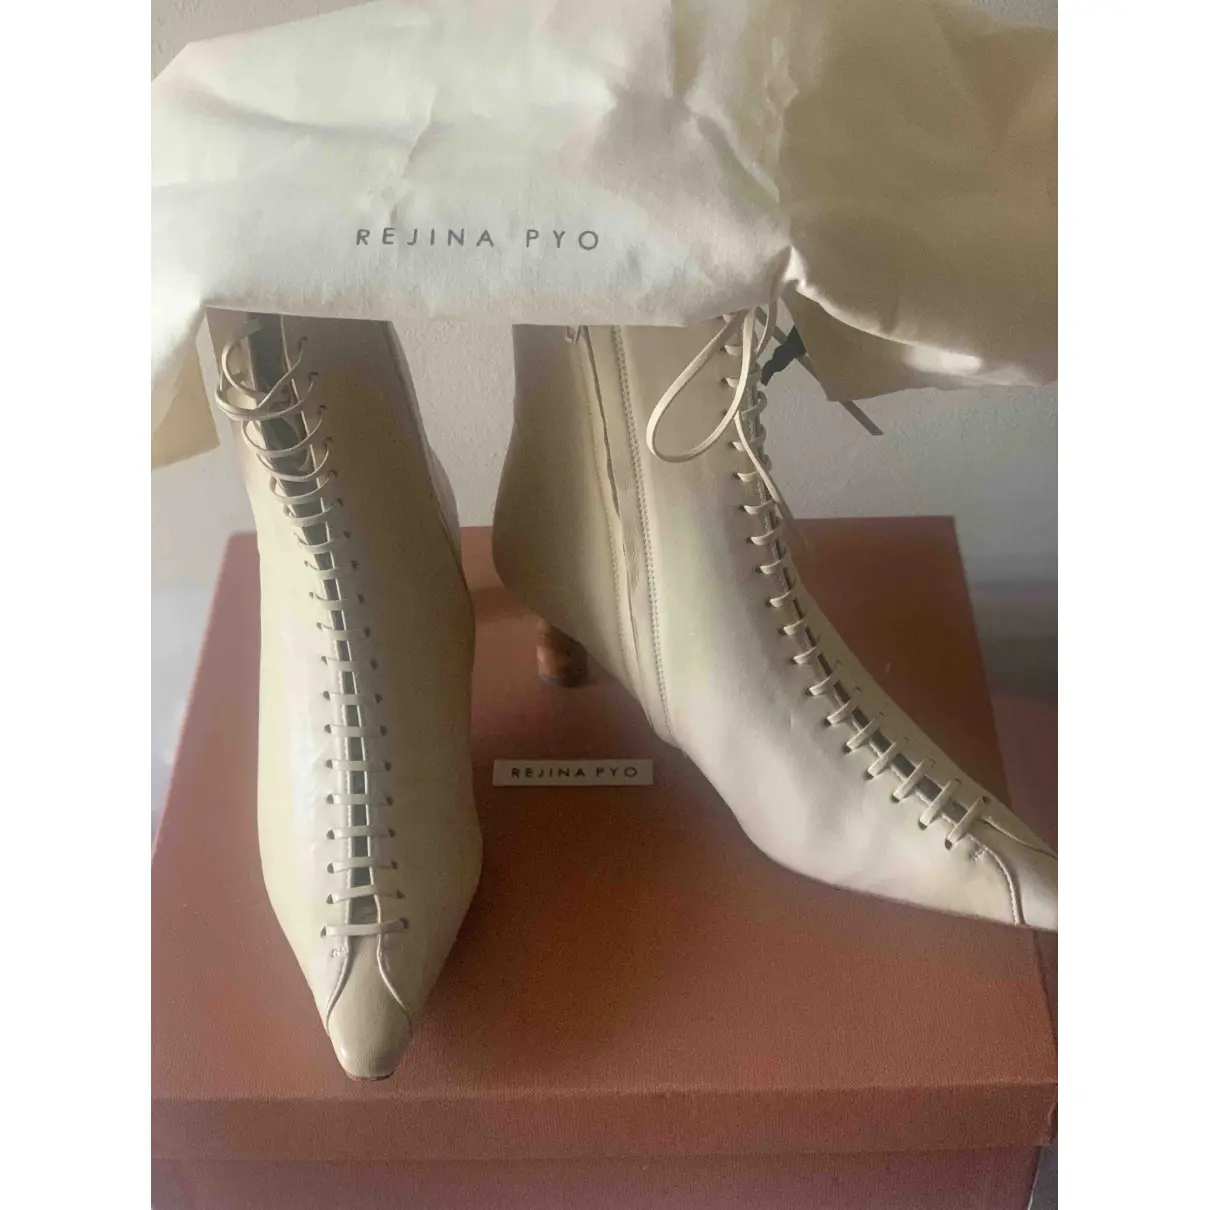 Buy Rejina Pyo Leather ankle boots online